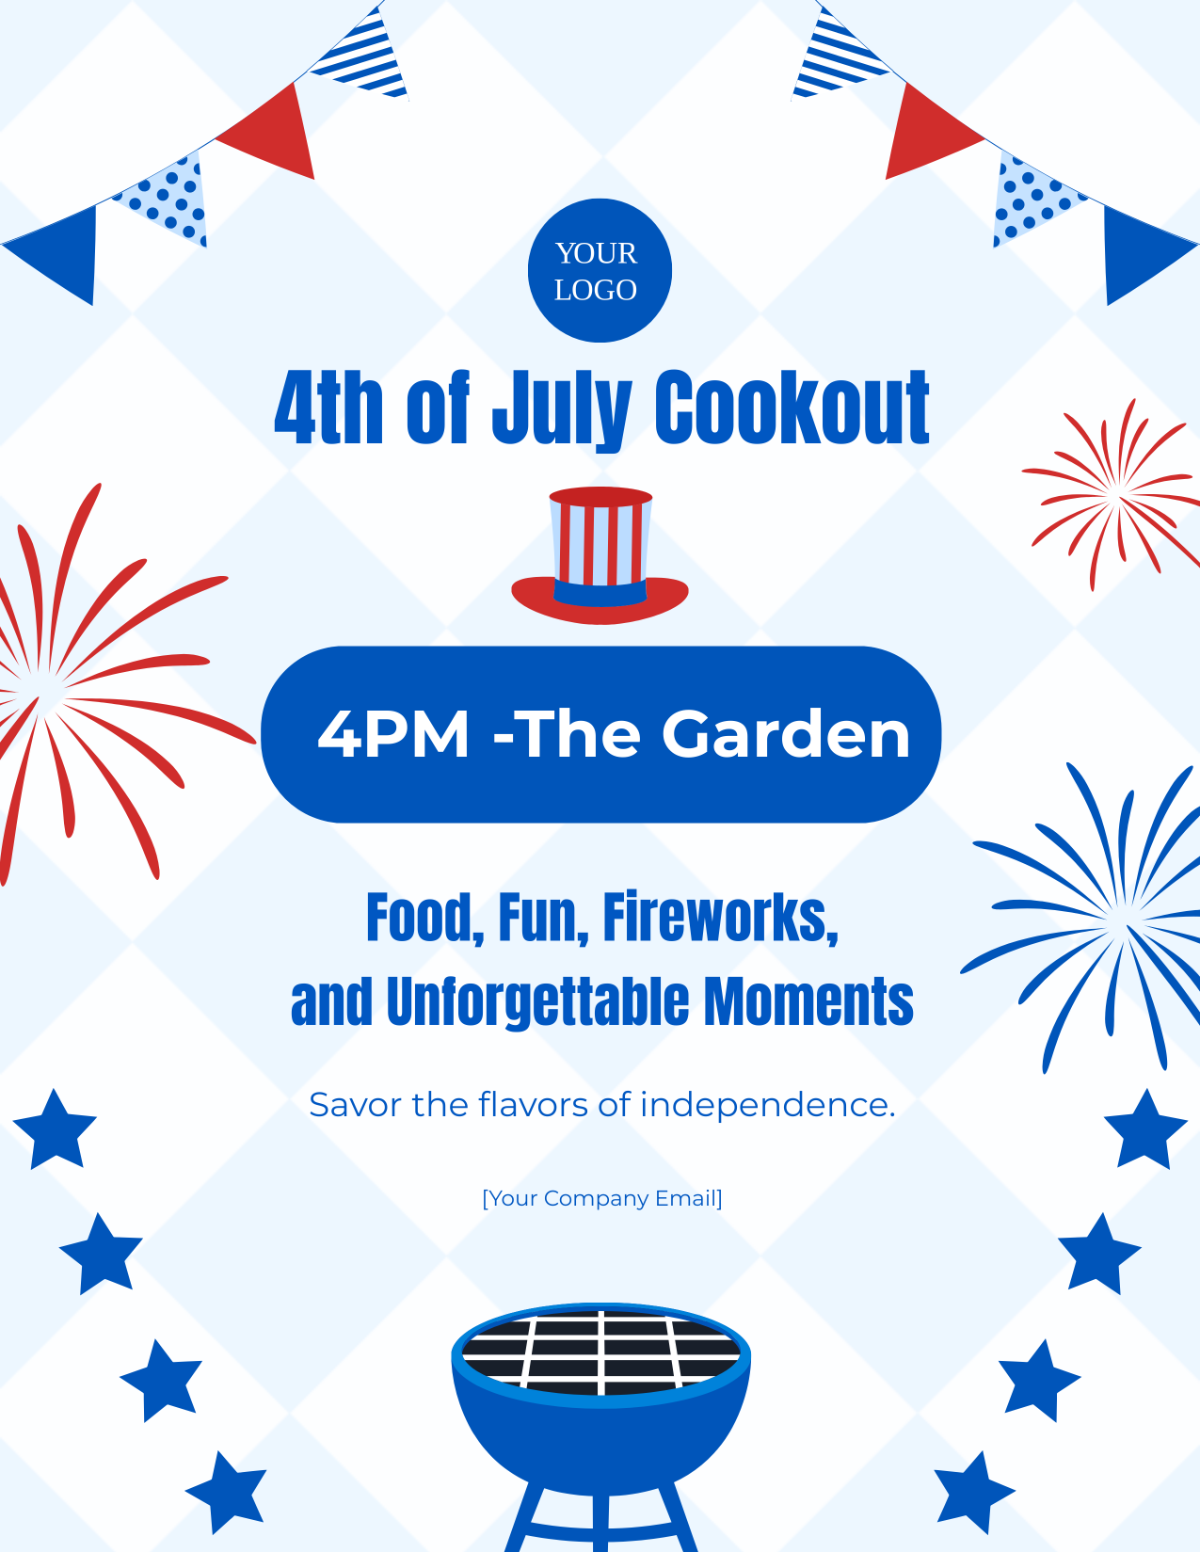 4th of July Cookout Flyer